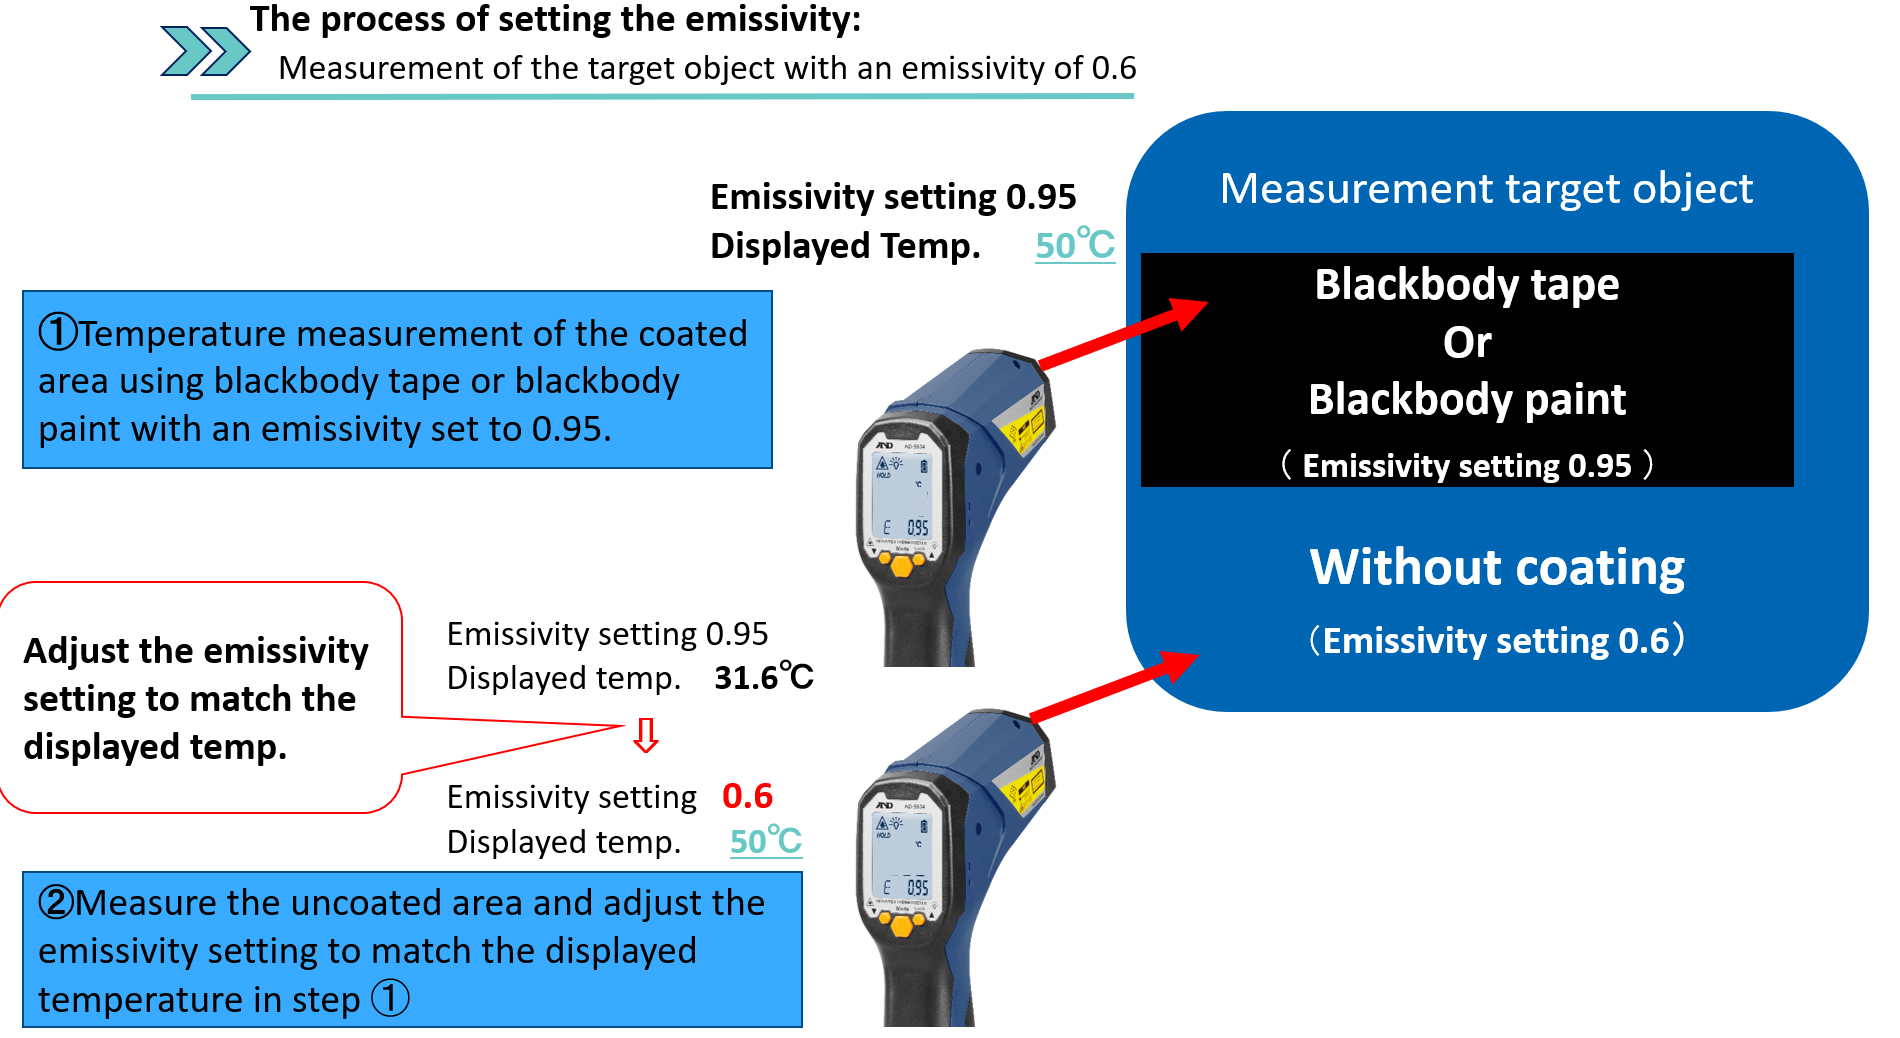 AD-5635 How to set the emissivity - A&D Instruments India - Discover ...